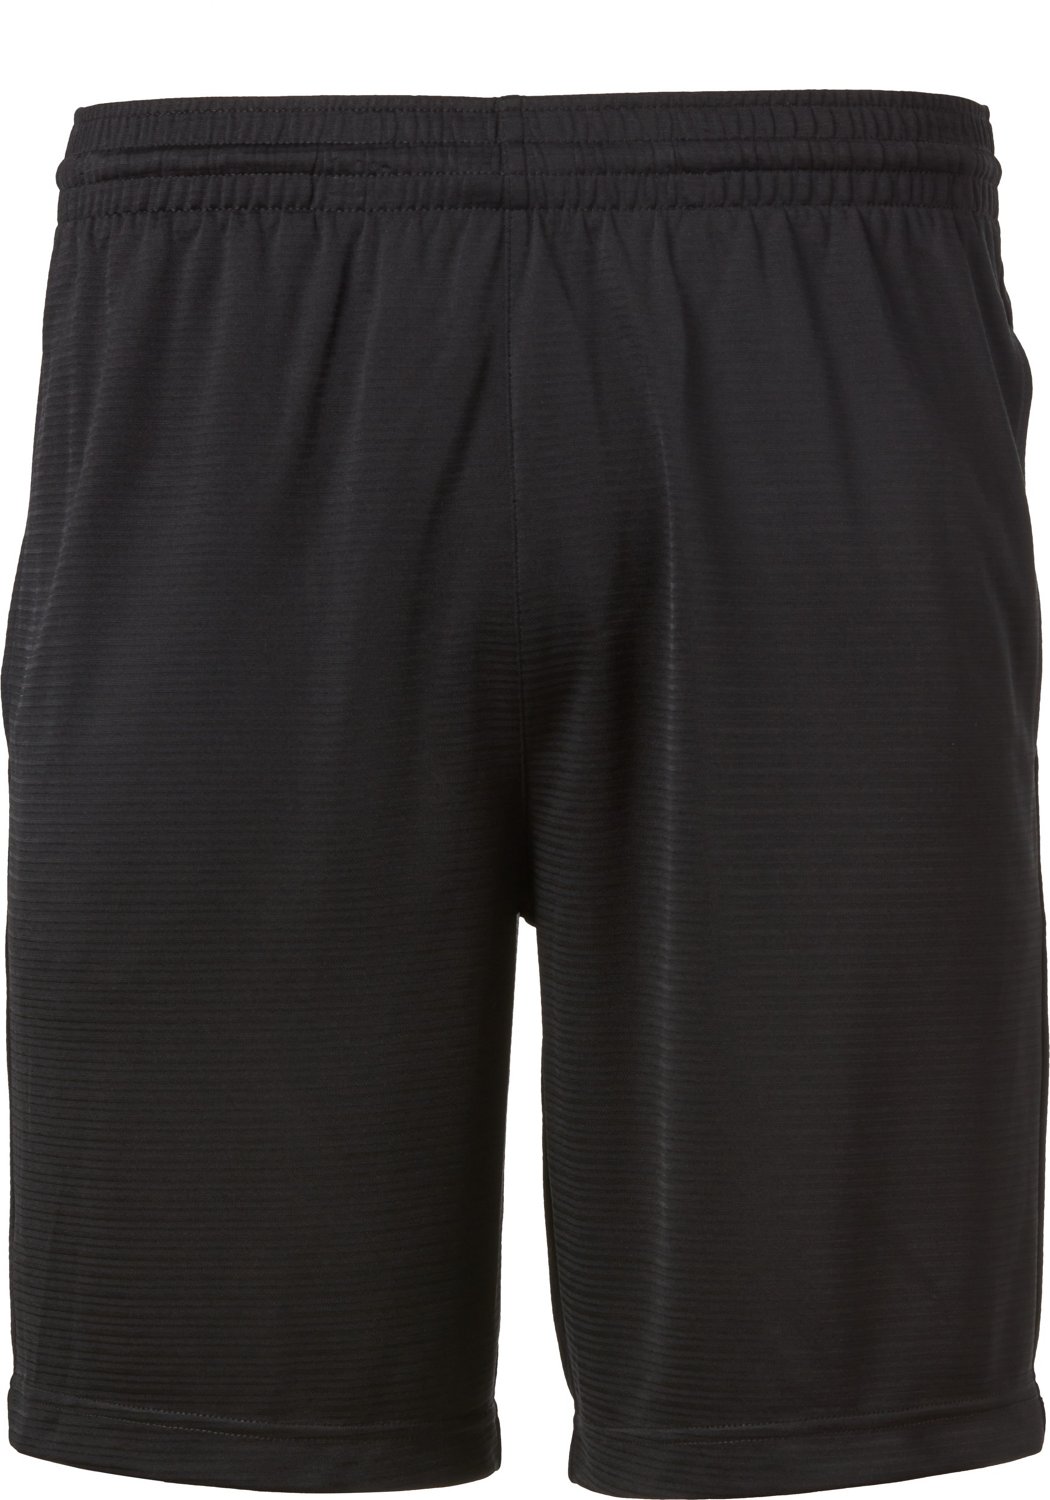 BCG Mens Dazzle Basketball Shorts 9 in